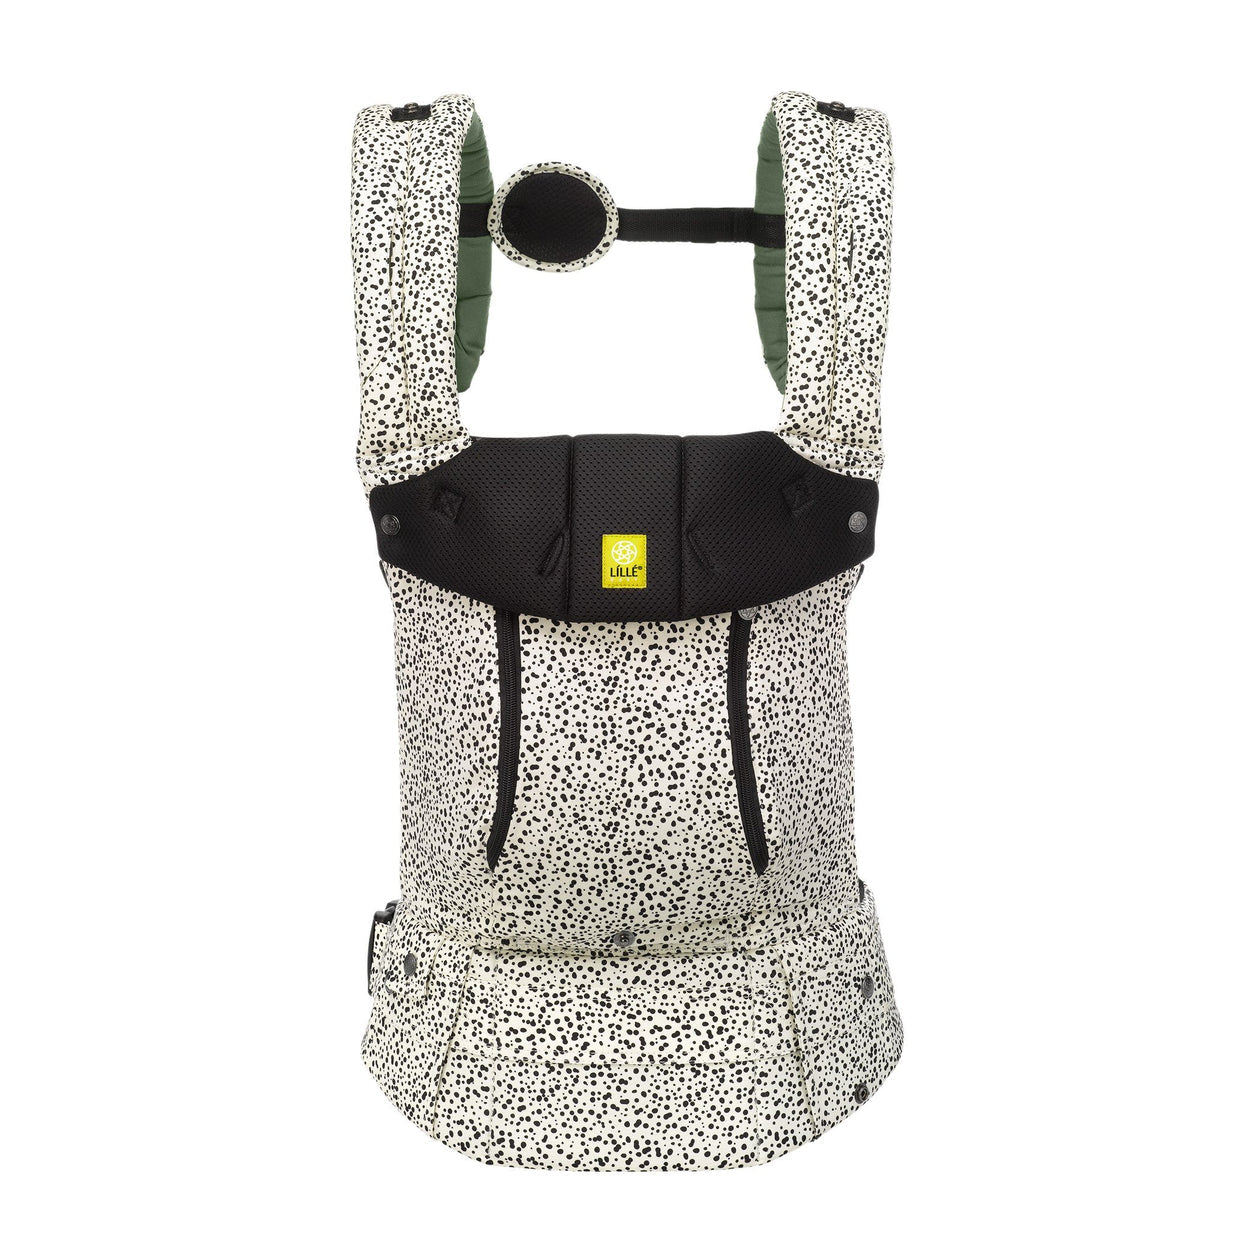 lillebaby complete all seasons baby carrier in salt and pepper